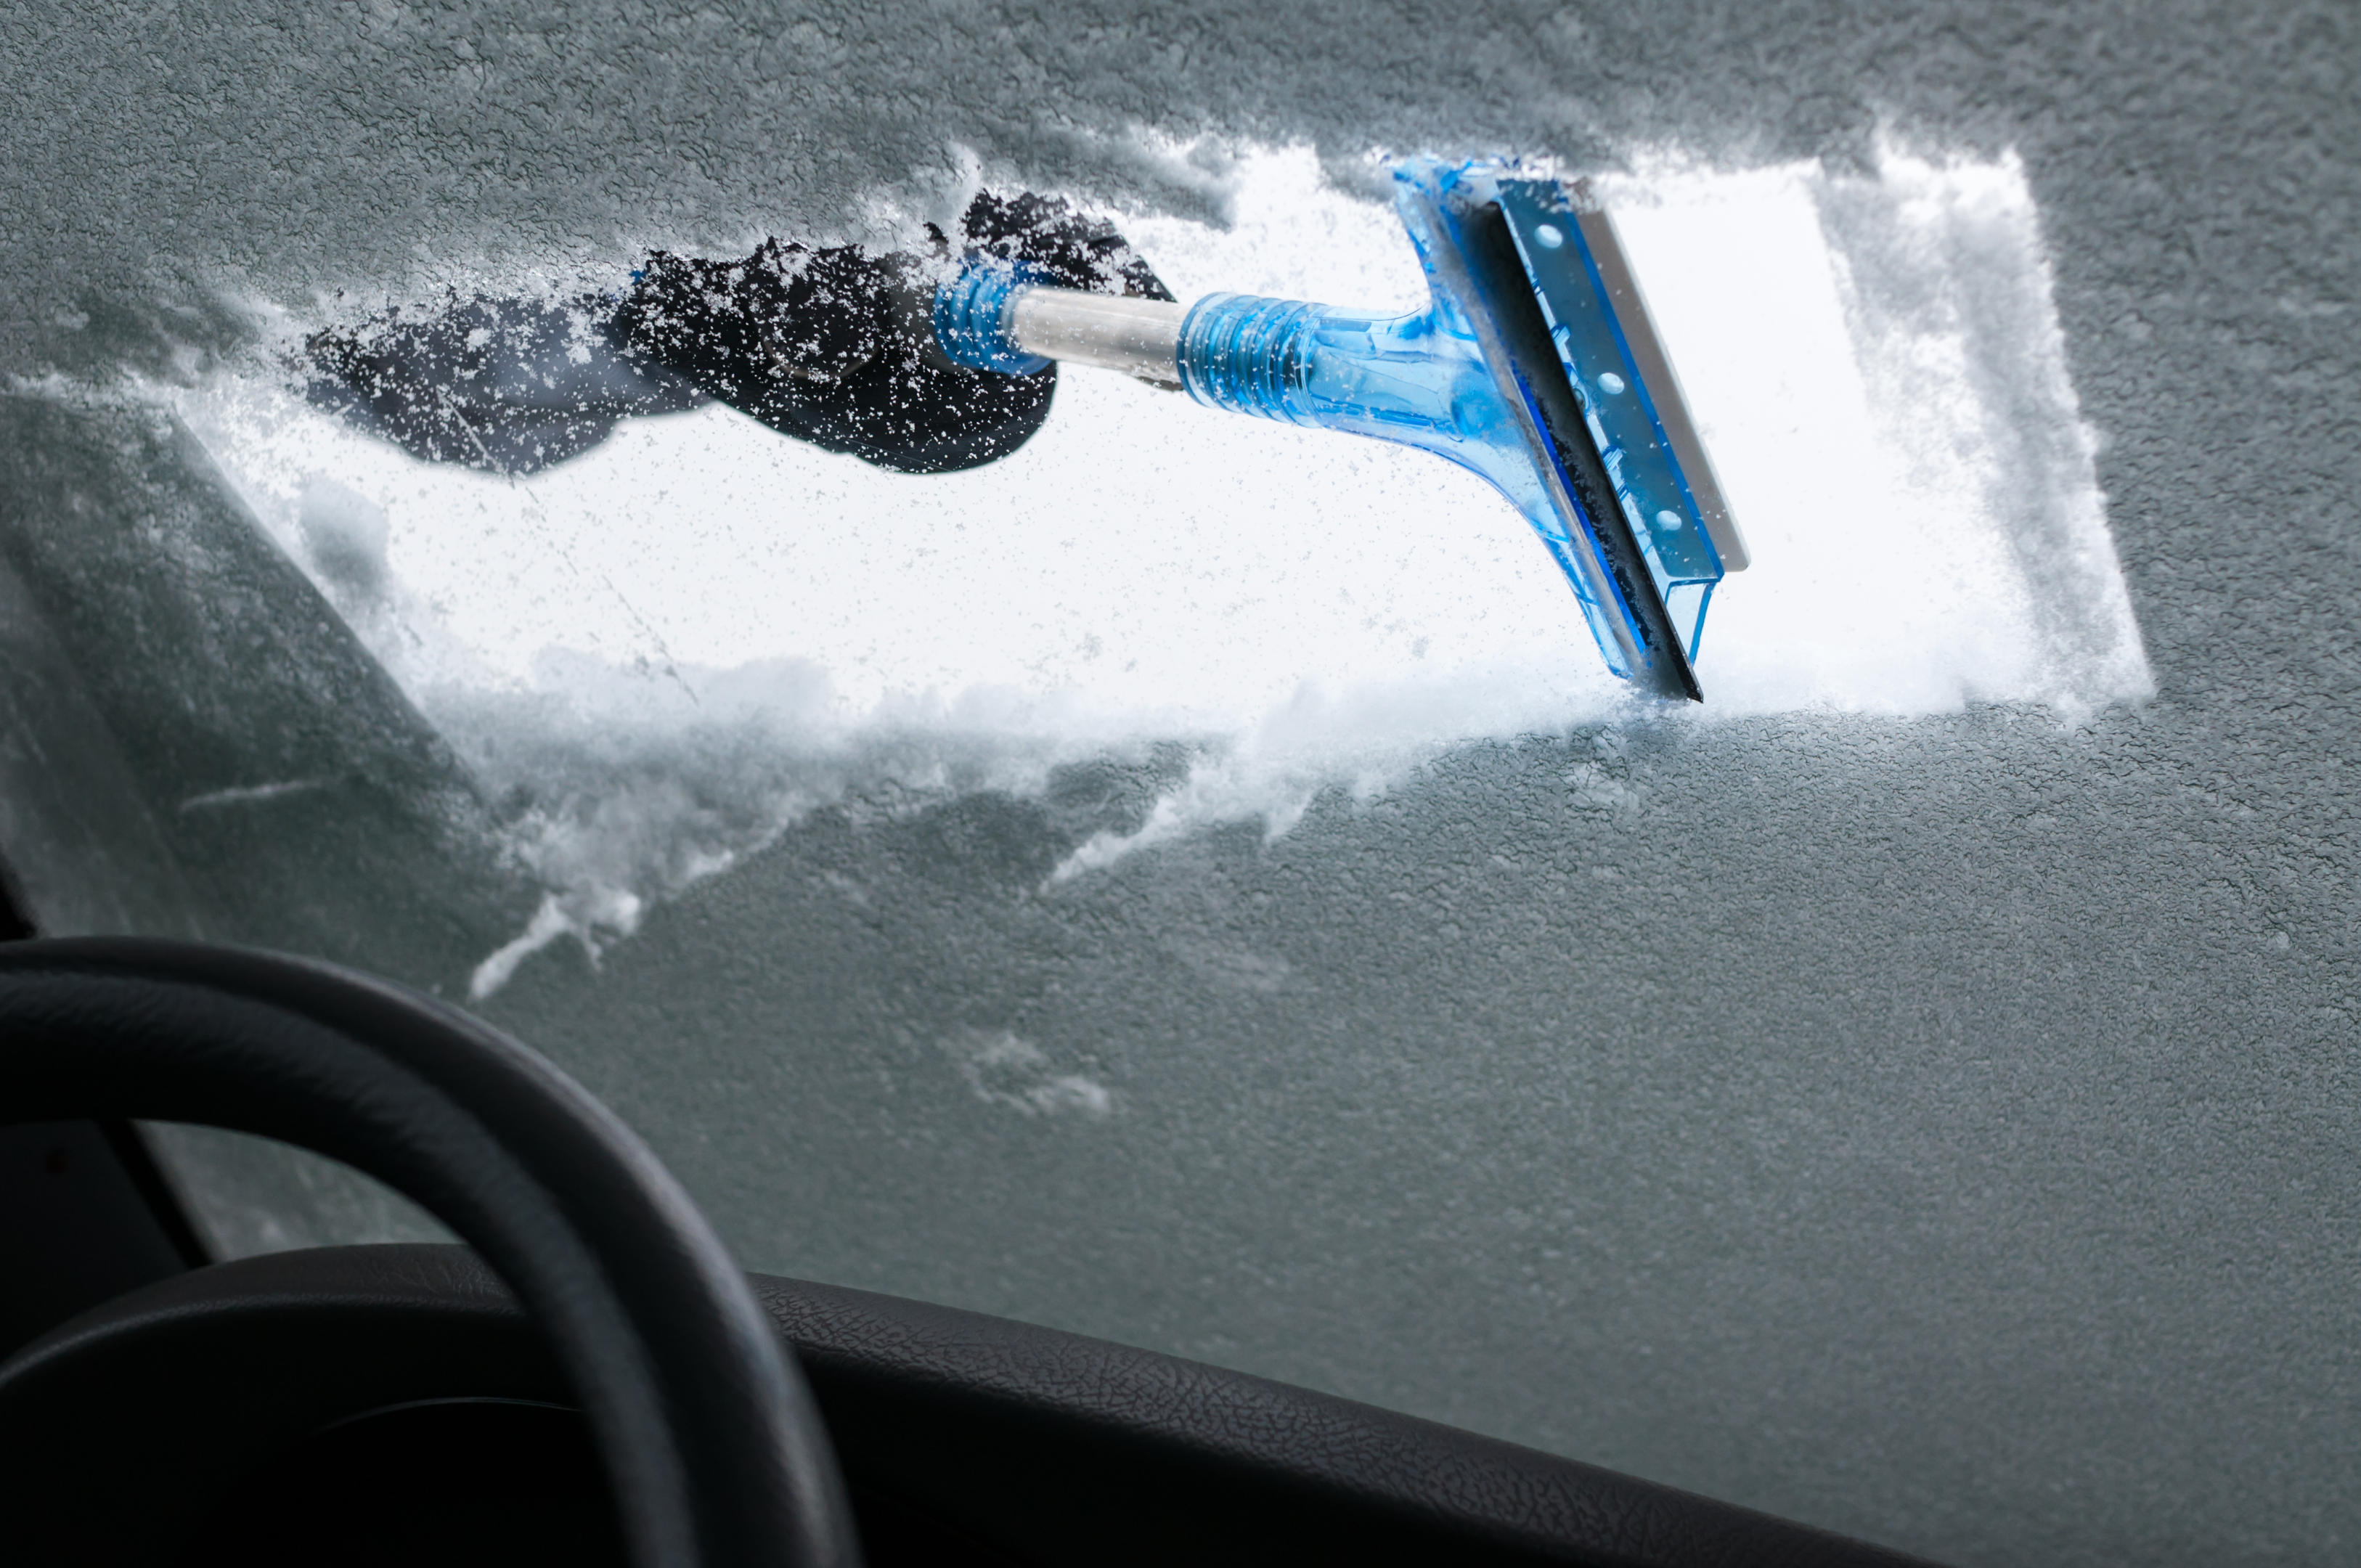 Winter Driving Tip: Get the car ready for winter driving after the snow.